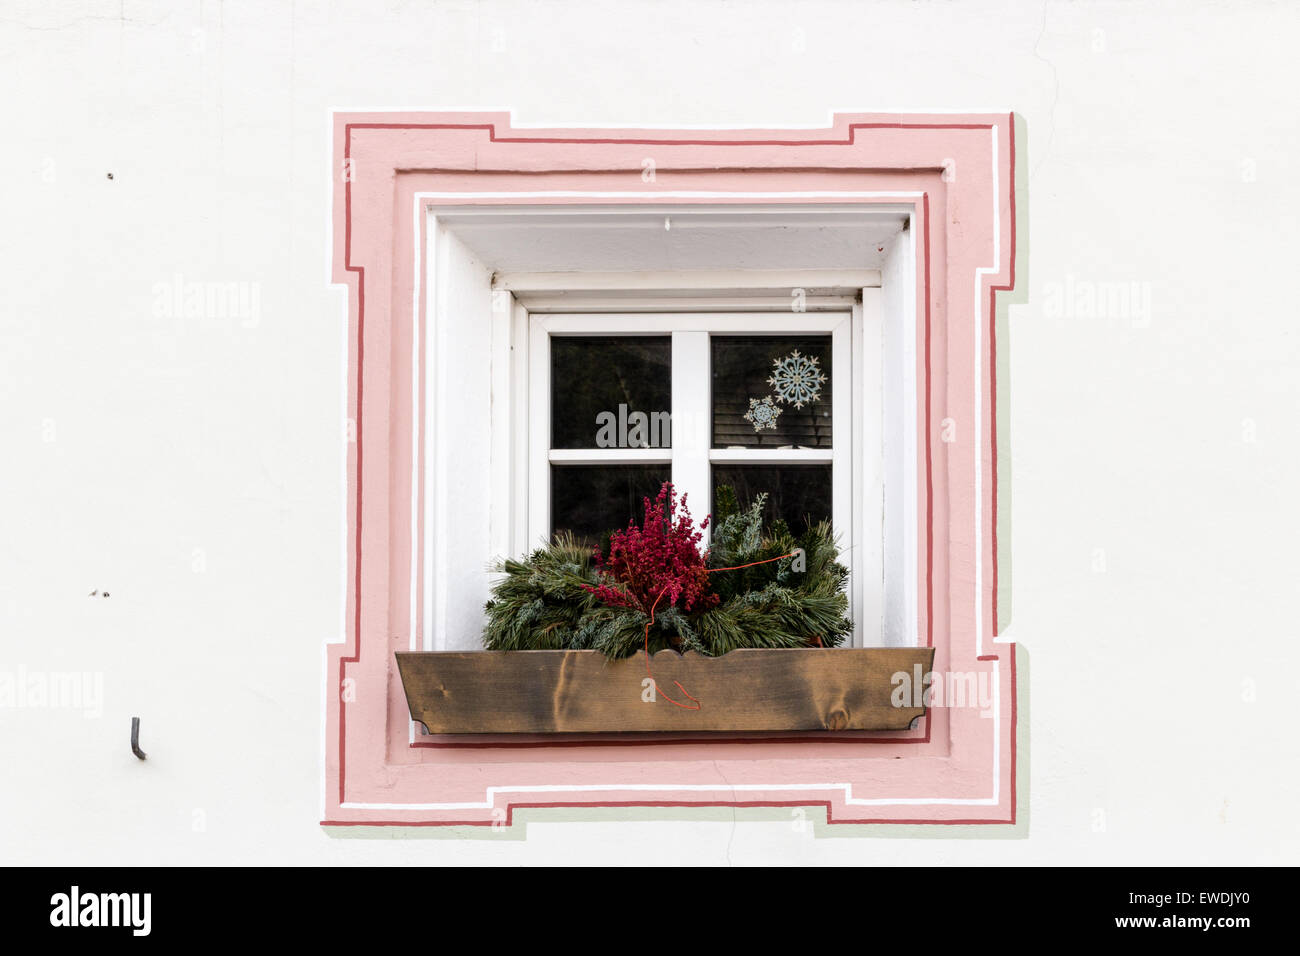 Squared glass window with pink frame and simple border with plant and  flower pot Stock Photo - Alamy